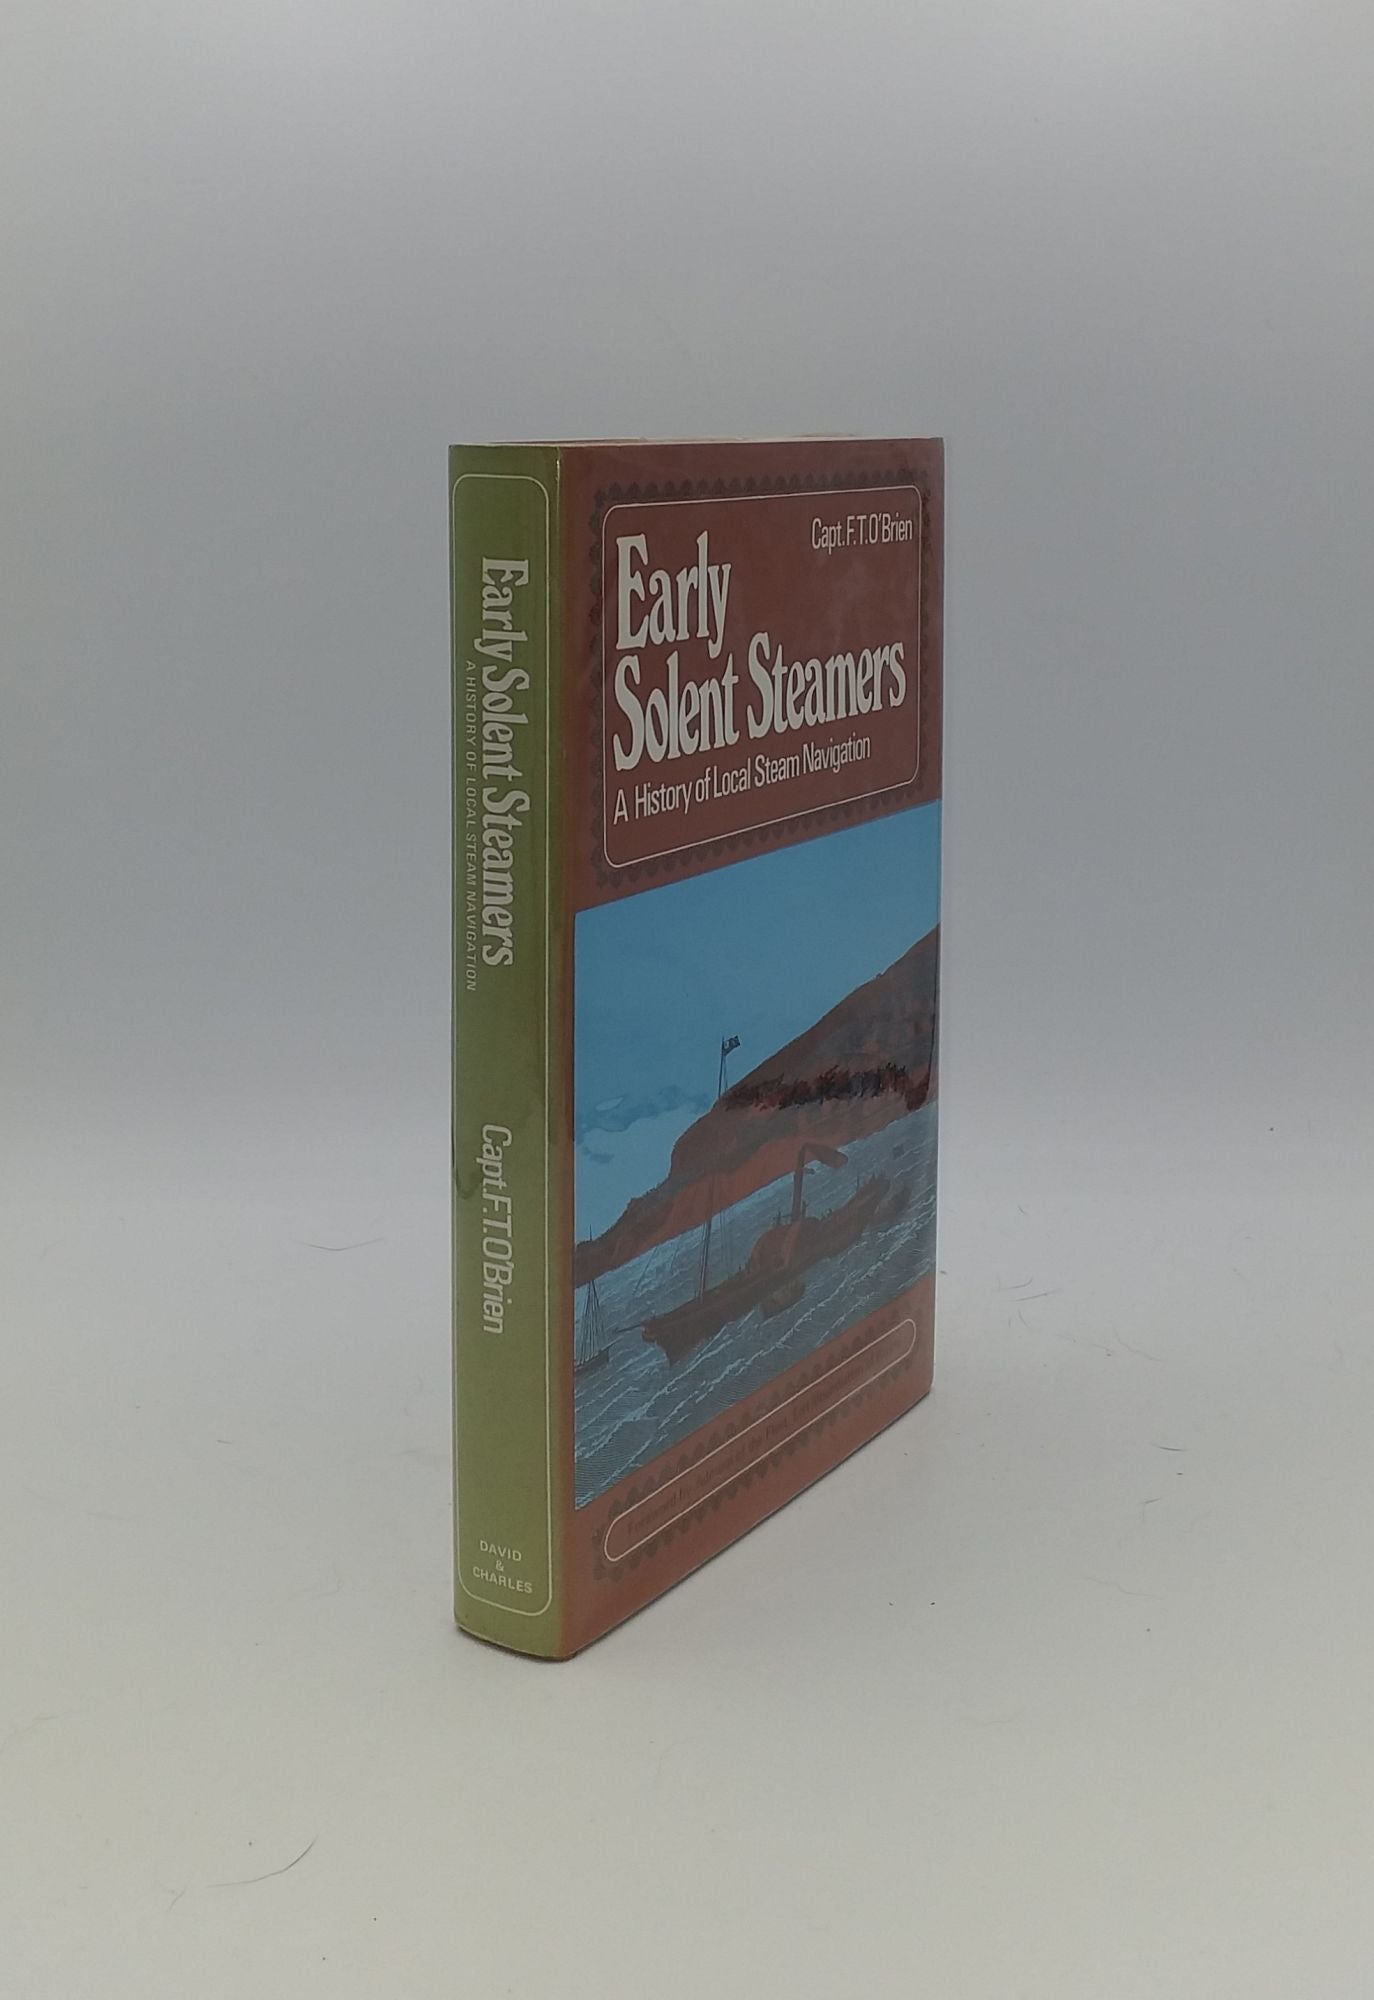 O'BRIEN F.T. - Early Solent Steamers History of Local Steam Navigation